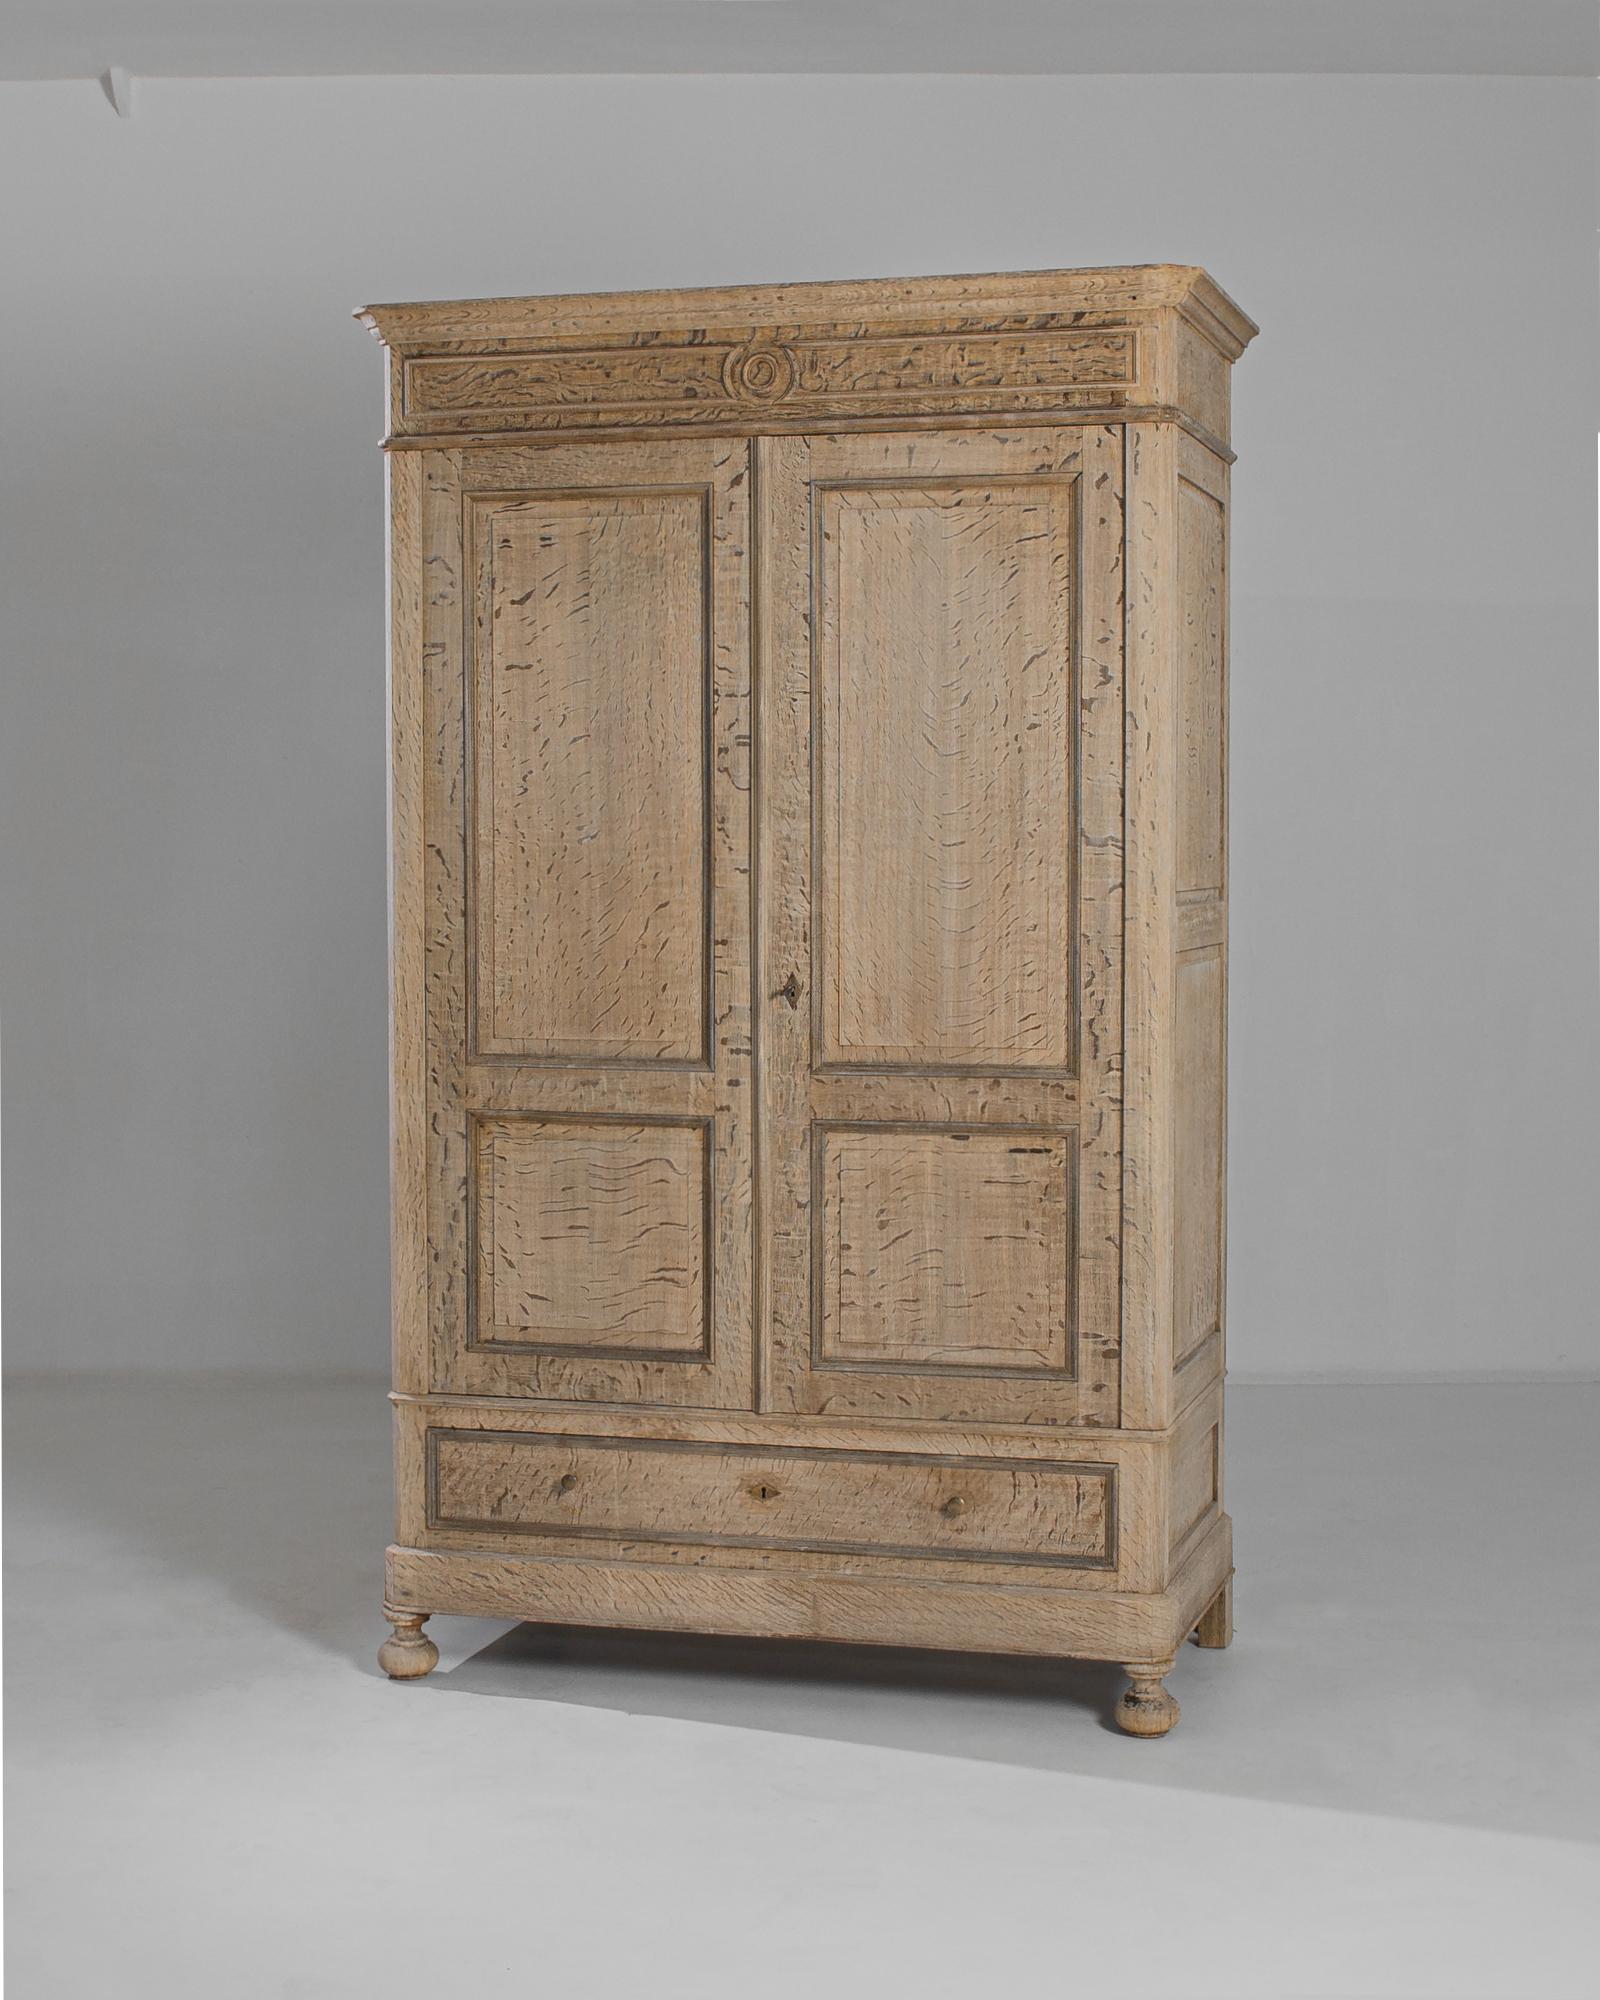 This bleached oak armoire with crown molding was made in France, circa 1880. Crafted by artisans in the past and meticulously refreshed in our atelier, the armoire displays a light finish evoking the charm of a rustic farmhouse. It features spacious